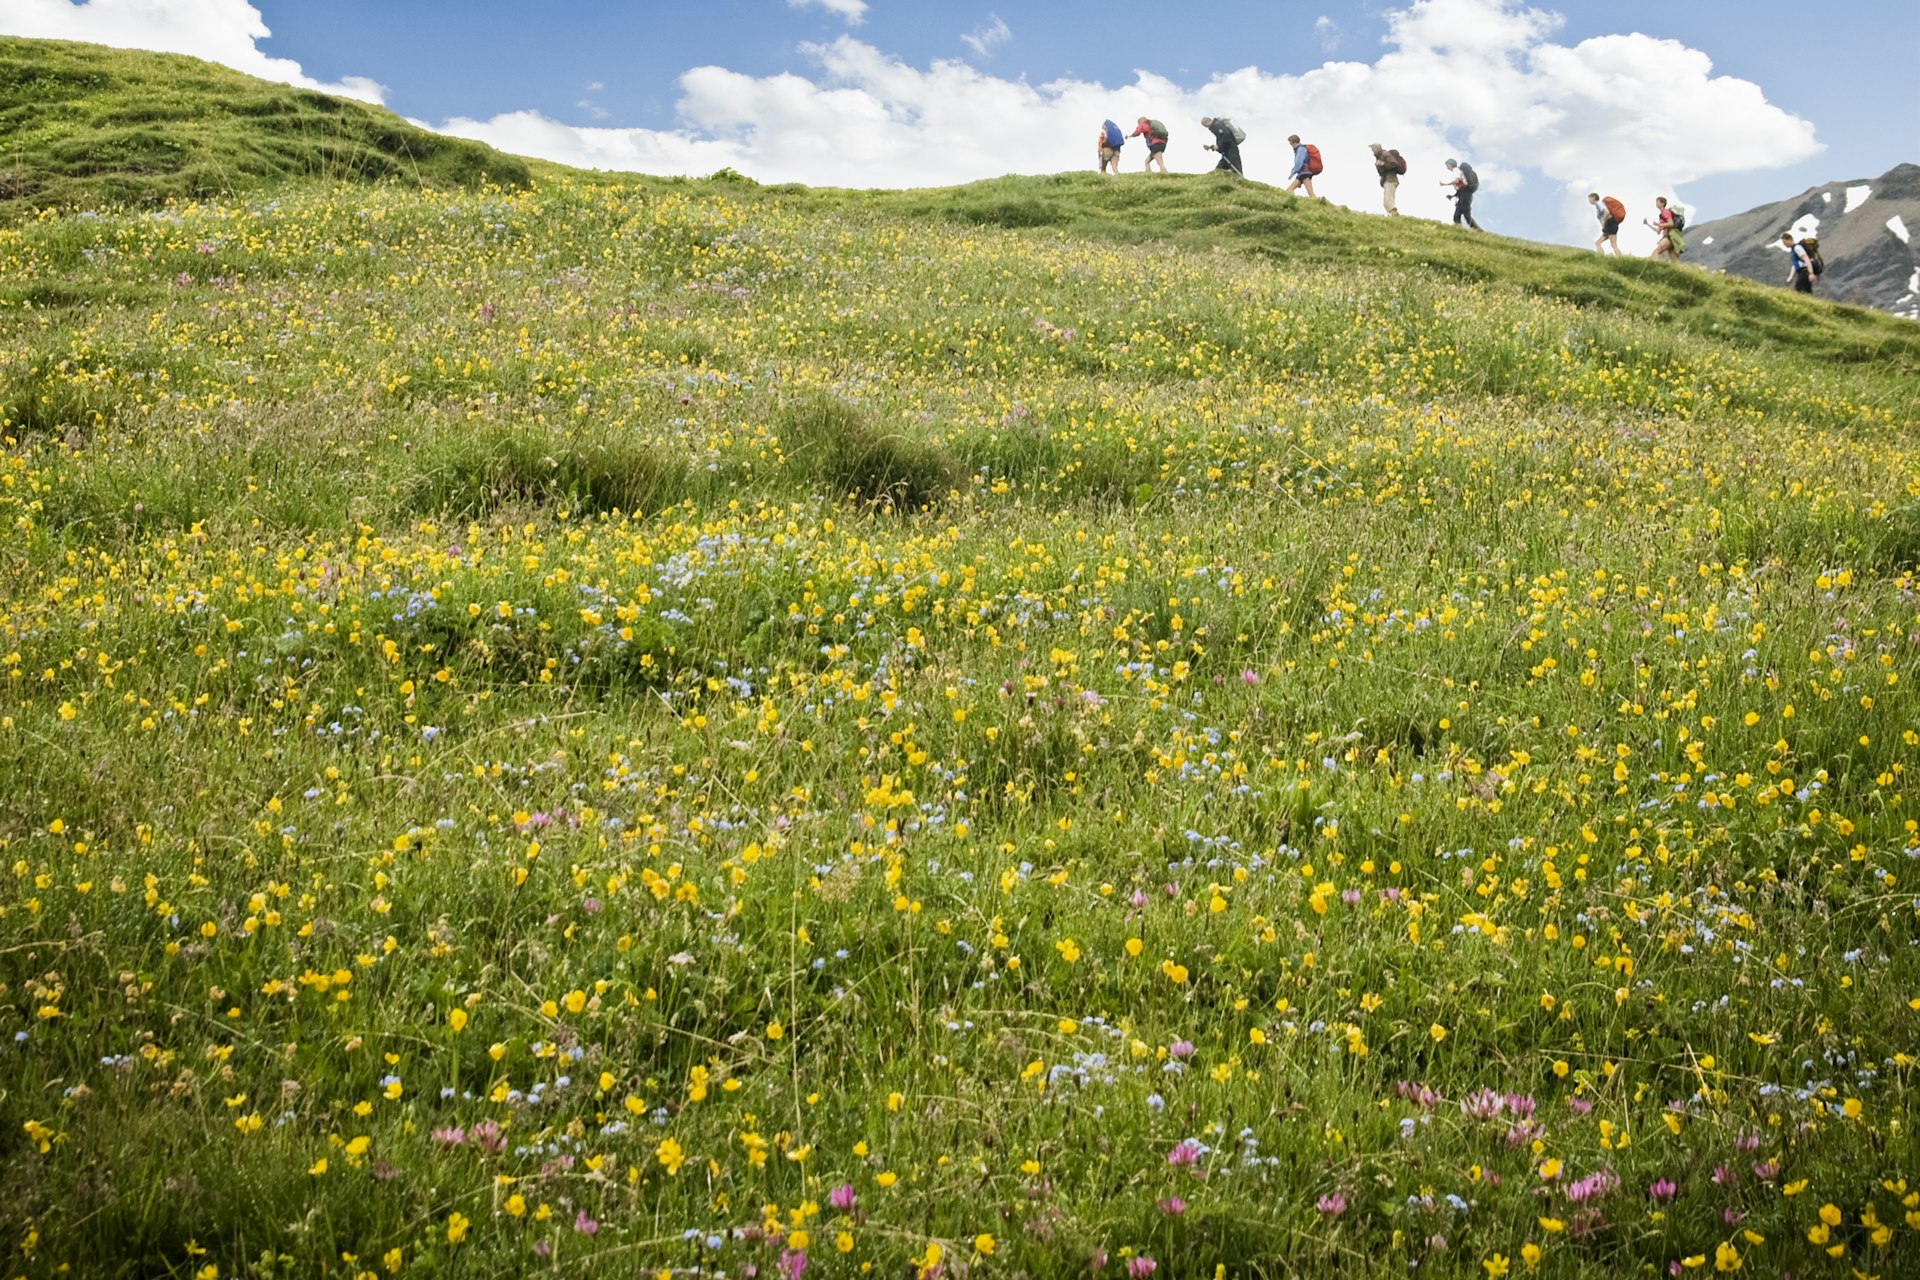 Hikers trek above a field full of colorful flowers in the Swiss Alps 